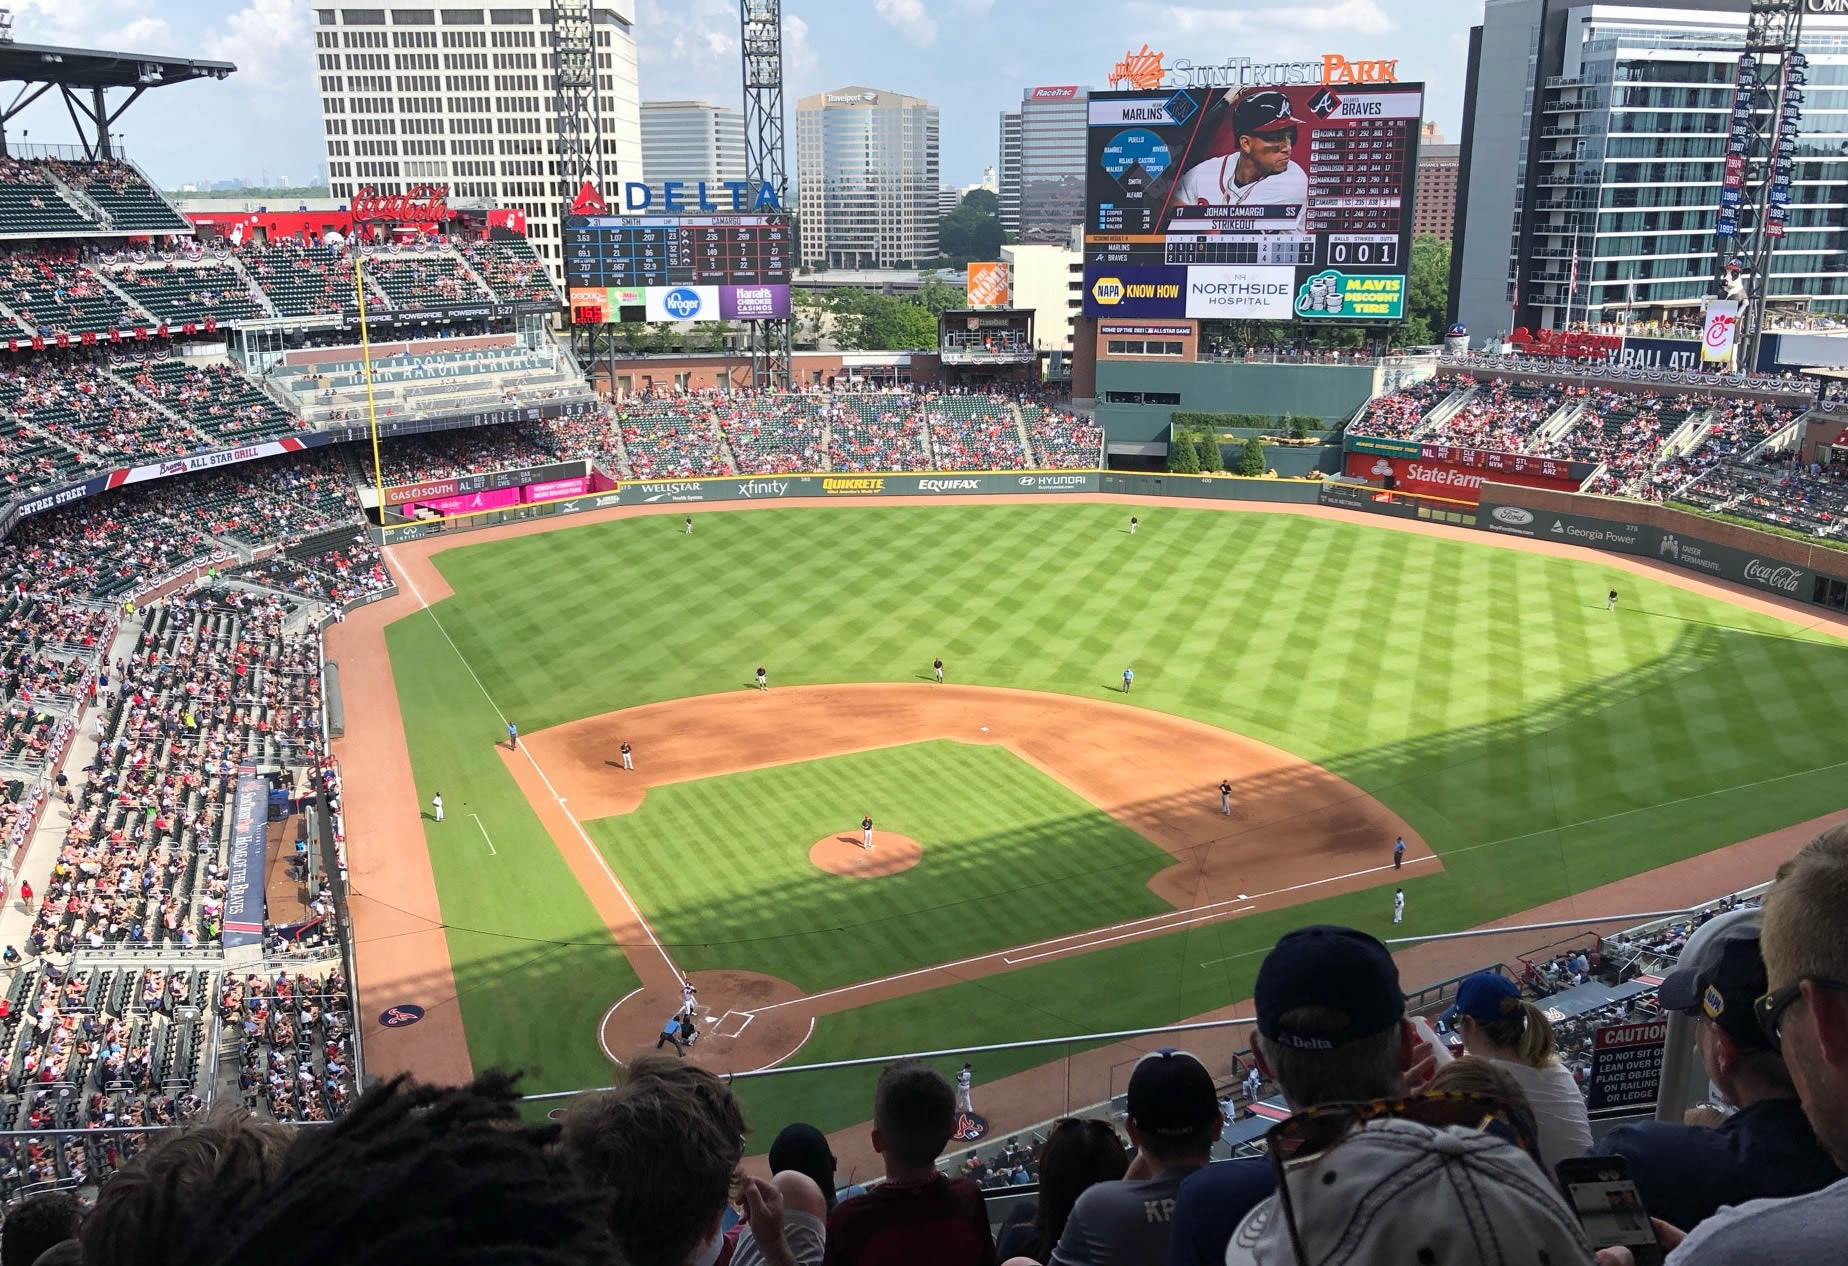 Comcast takes its position in outfield at SunTrust Park - Atlanta